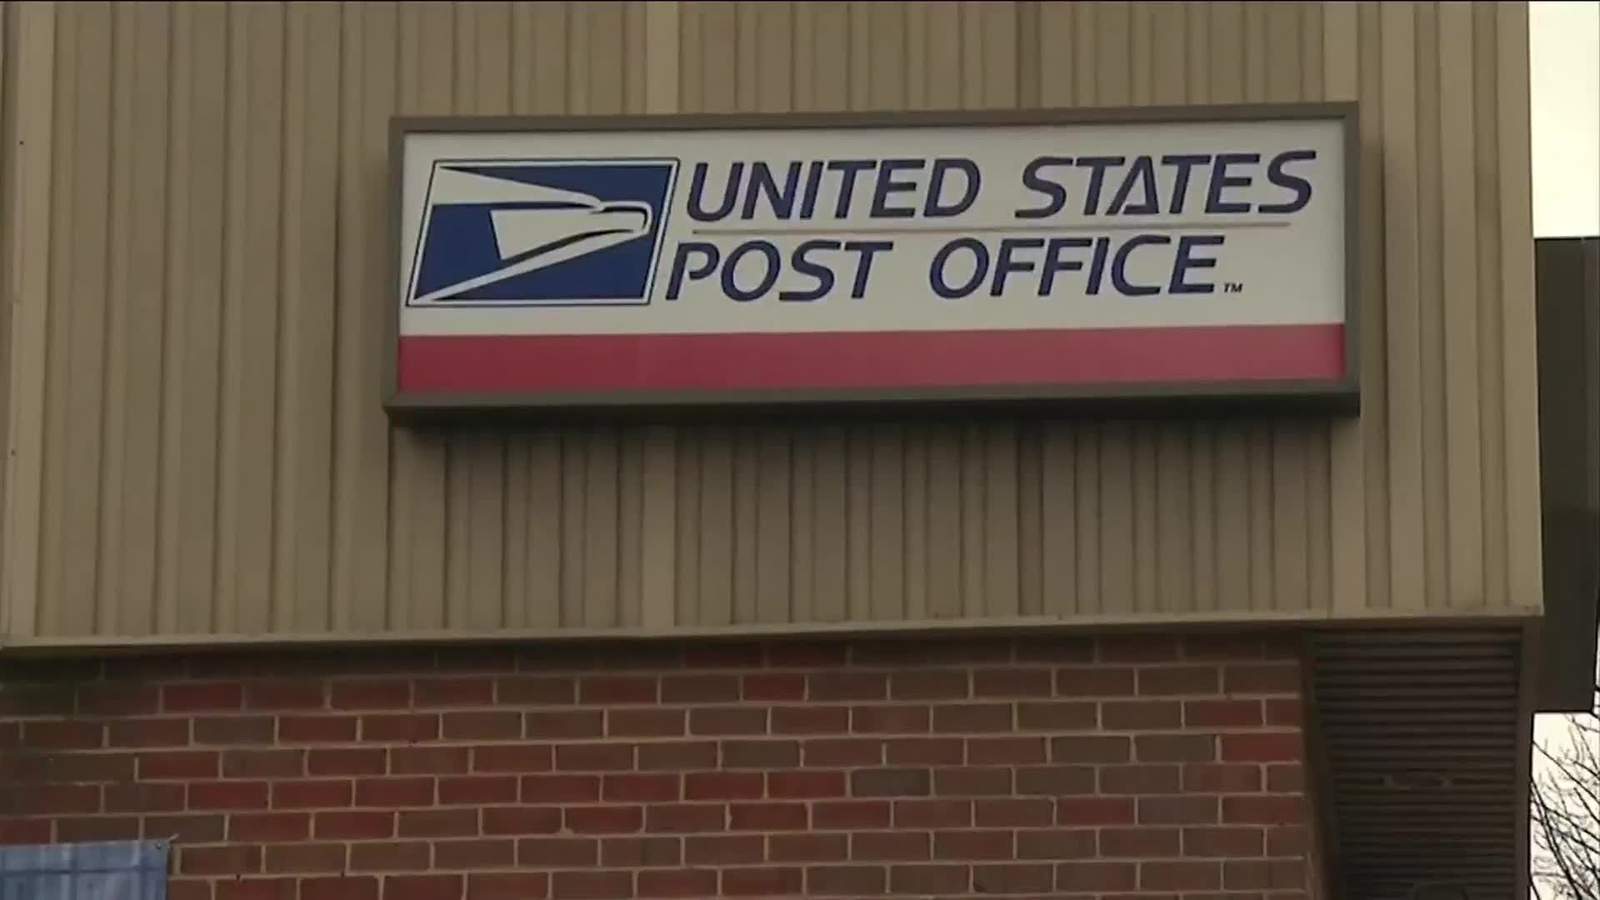 Select Metro Detroit Post Offices will be open on Sunday Dec. 6, Dec. 13